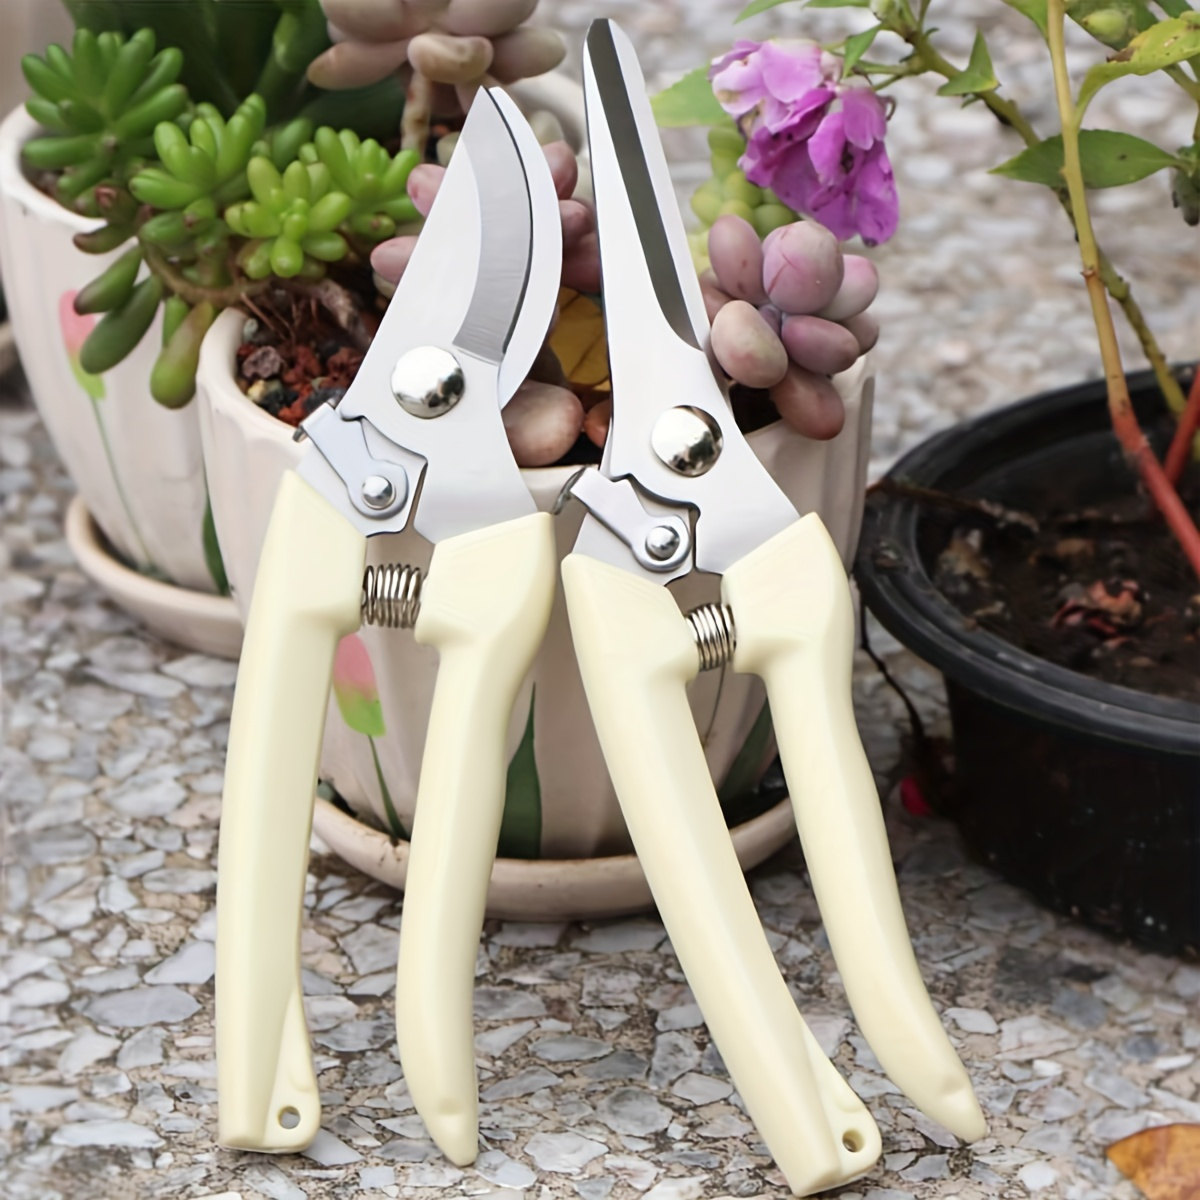 

Stainless Steel Pruning Shears Set - 1pc/2pcs, Sharp Blades For Flower Cutting, Plant Trimming, Bonsai & Fruit Harvesting